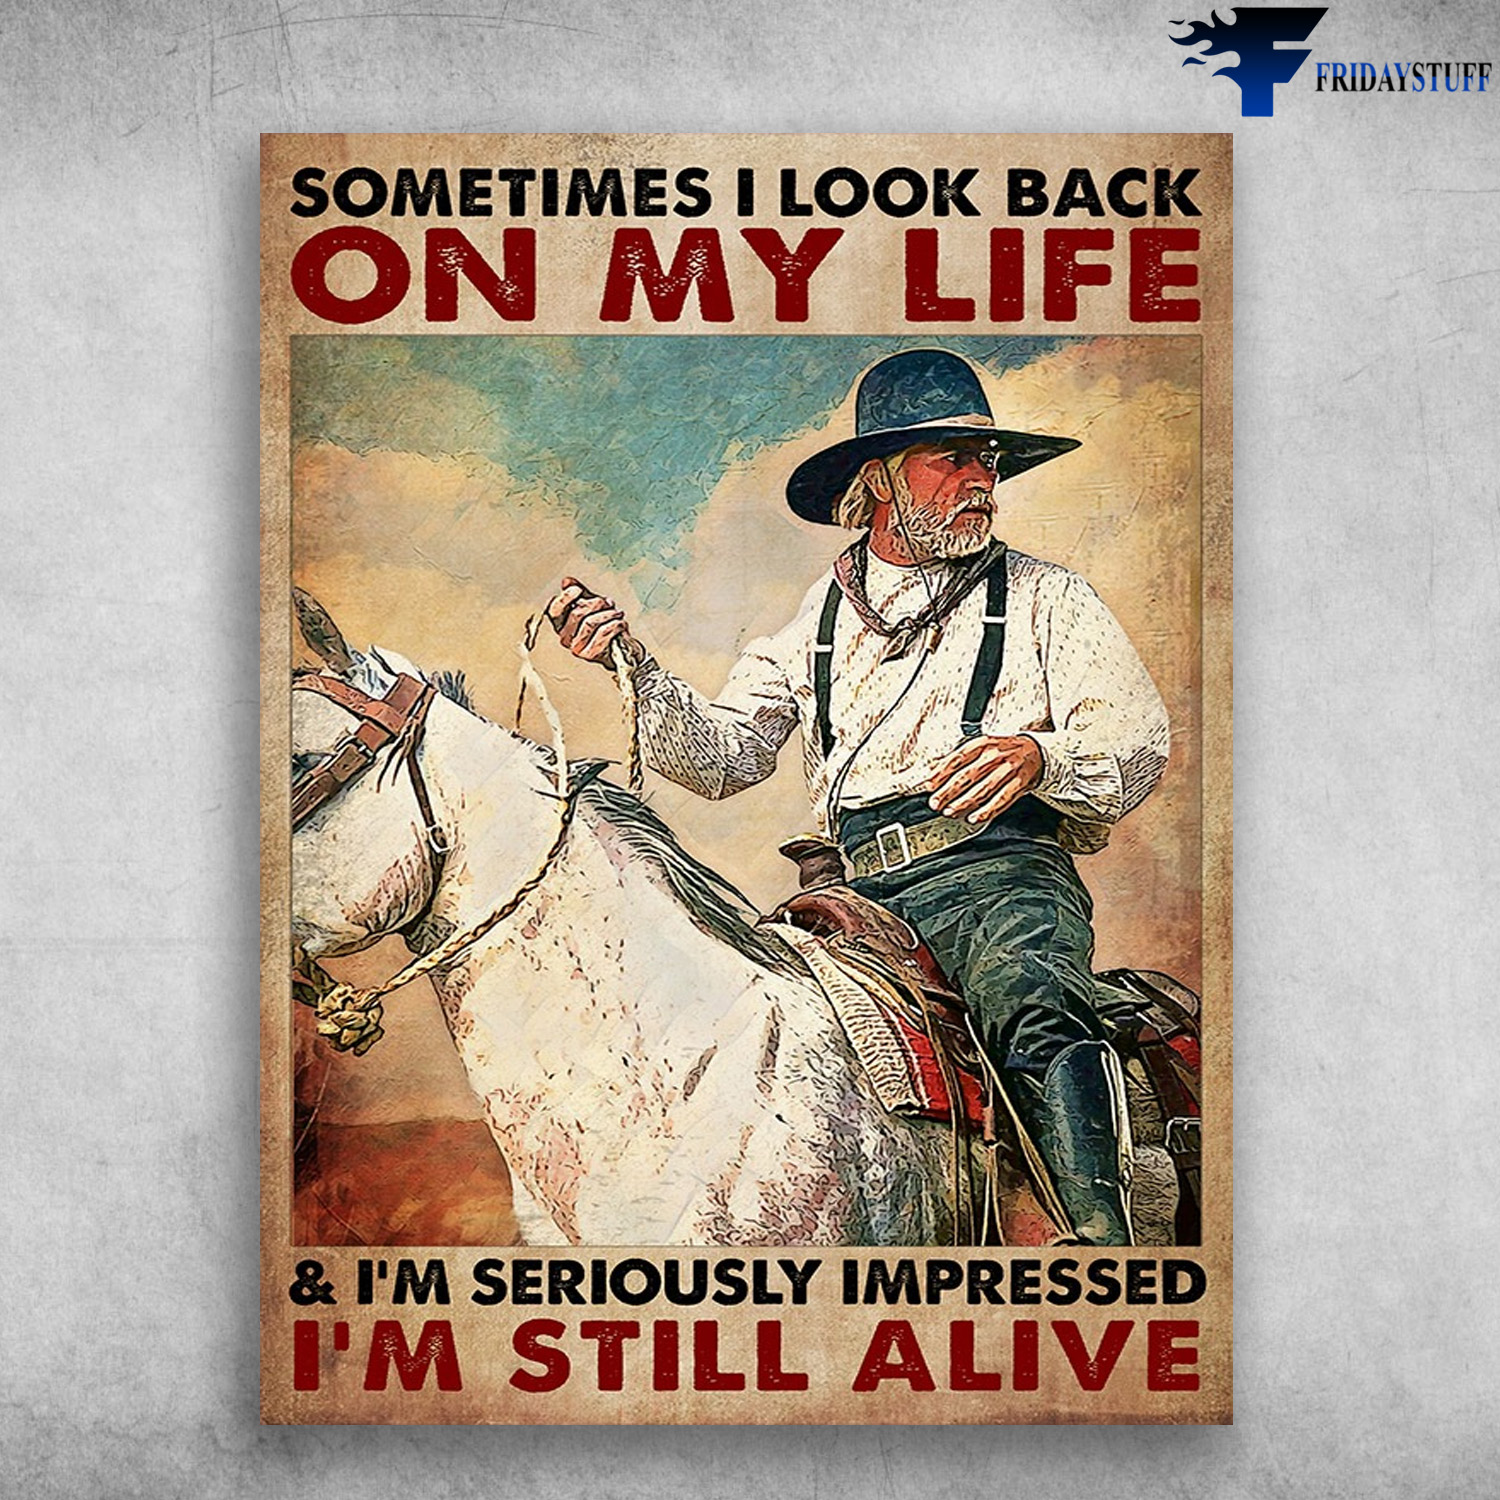 Old Cowboy, Horse Poster - Sometomes I Look Back, One My Life, And I'm Seriously Impressed, I'm Still Alive